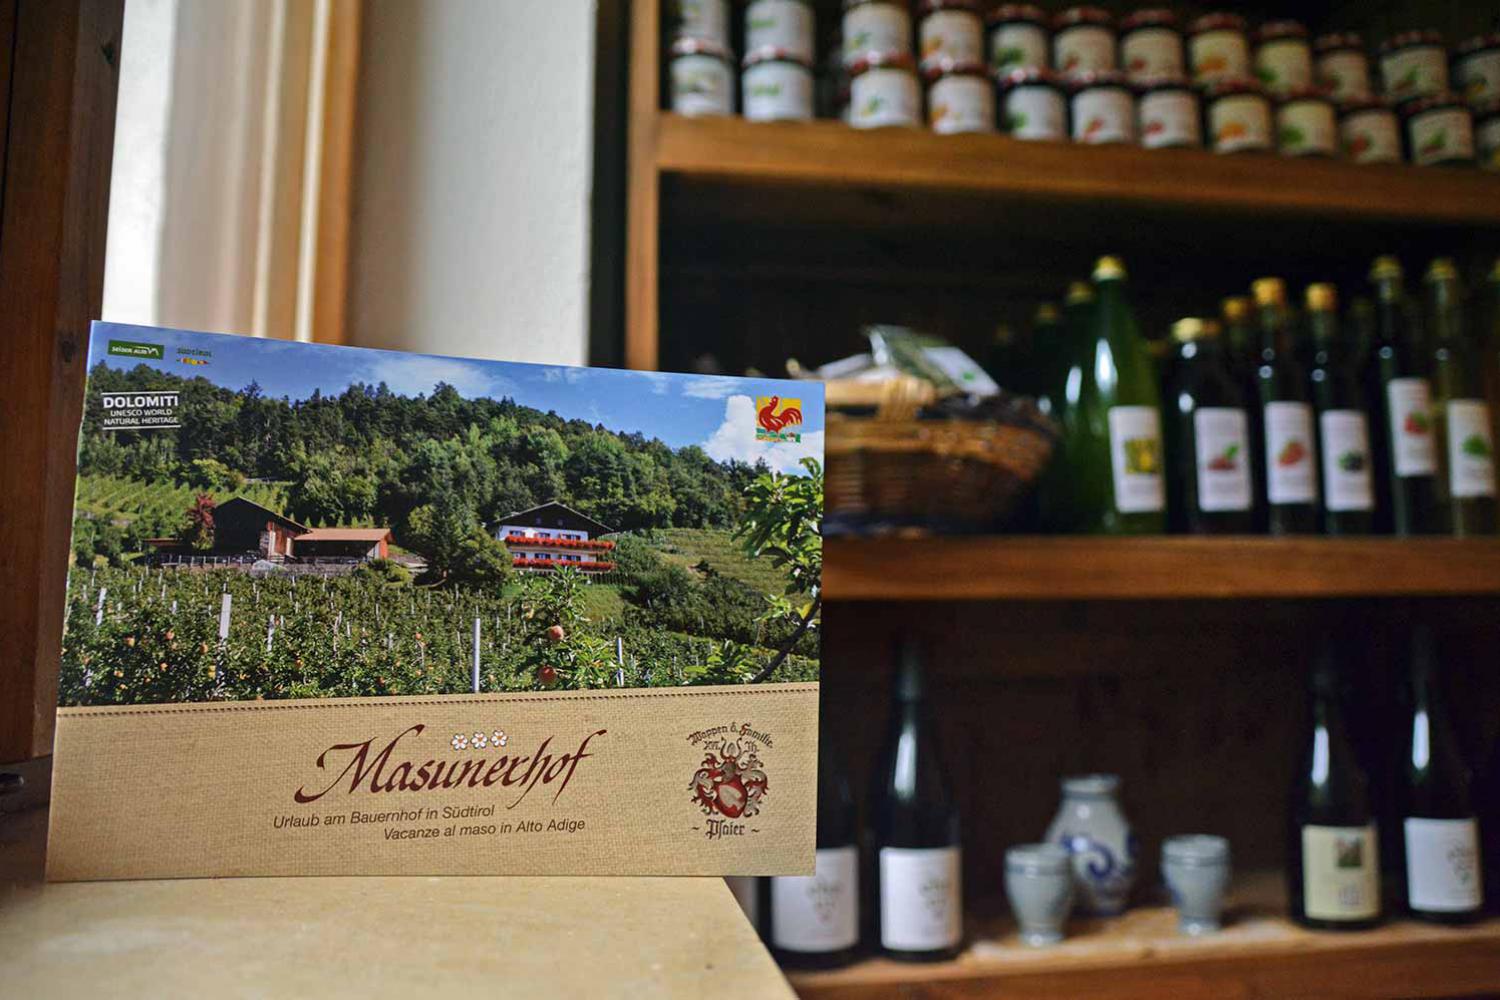 Farm products from the Masunerhof